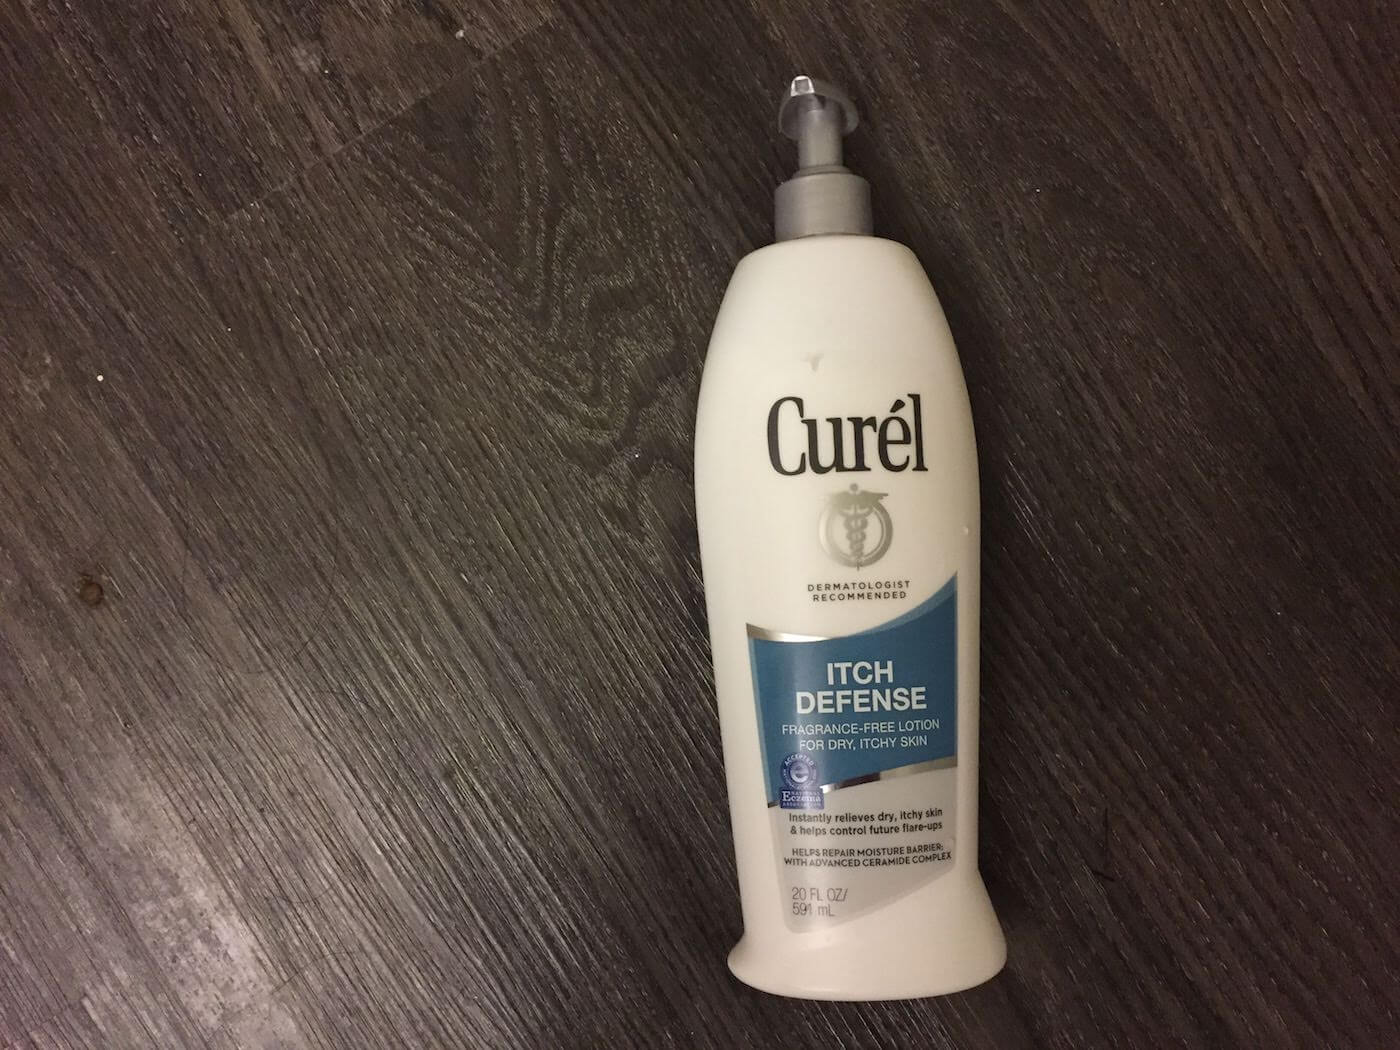 Curel Itch Defense Lotion Review